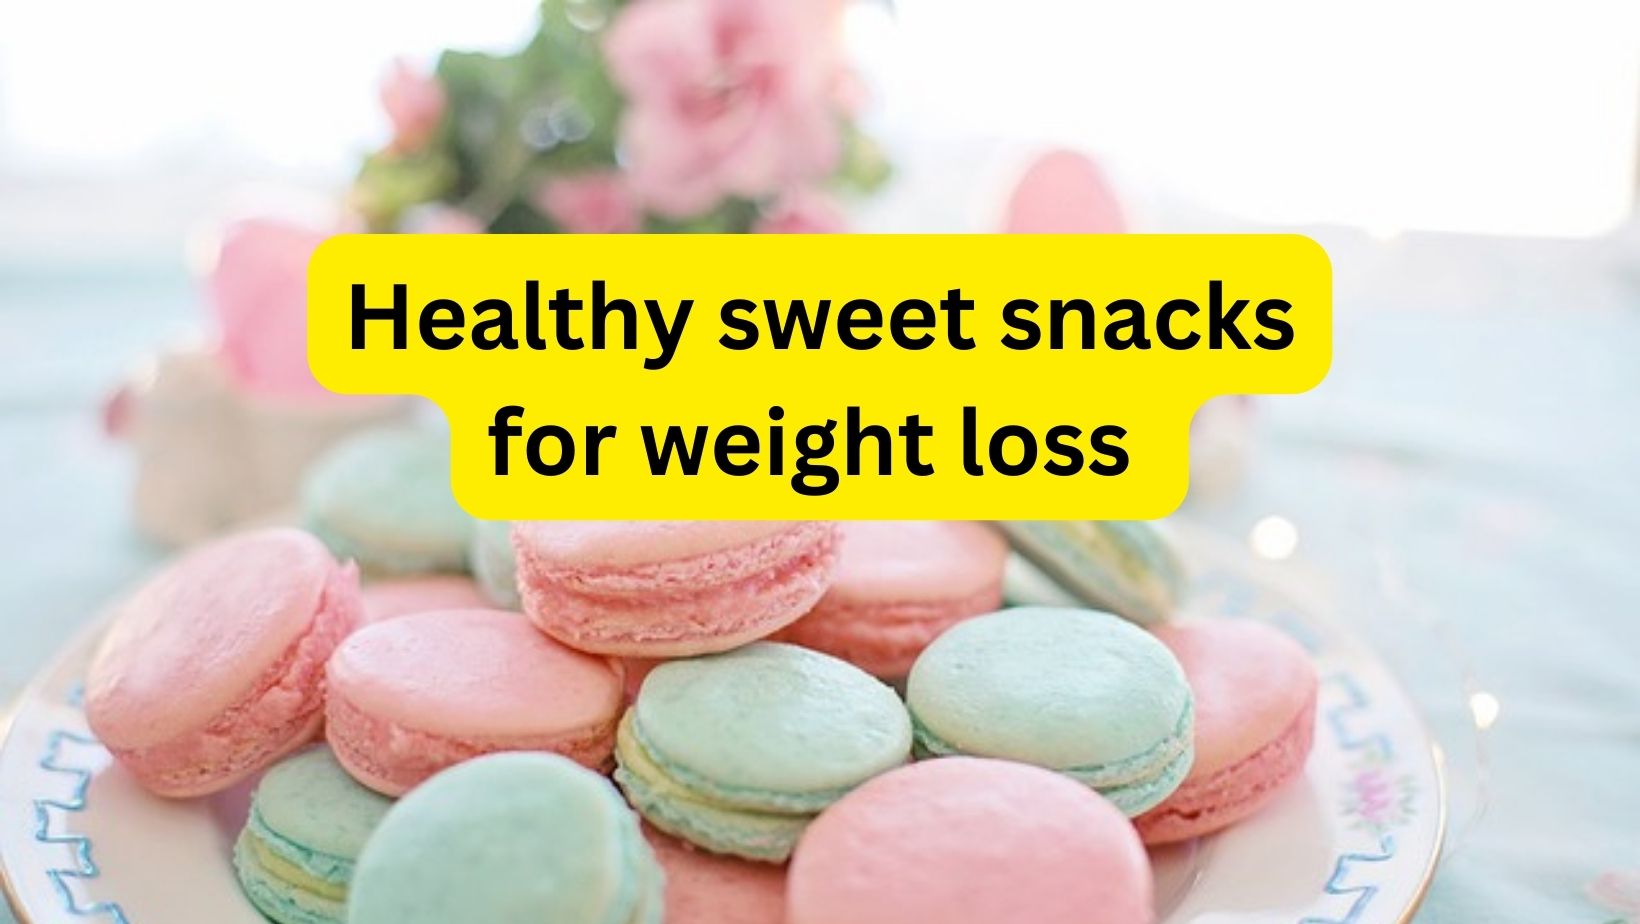 Healthy sweet snacks for weight loss - US IT BARI-Healthy Foods